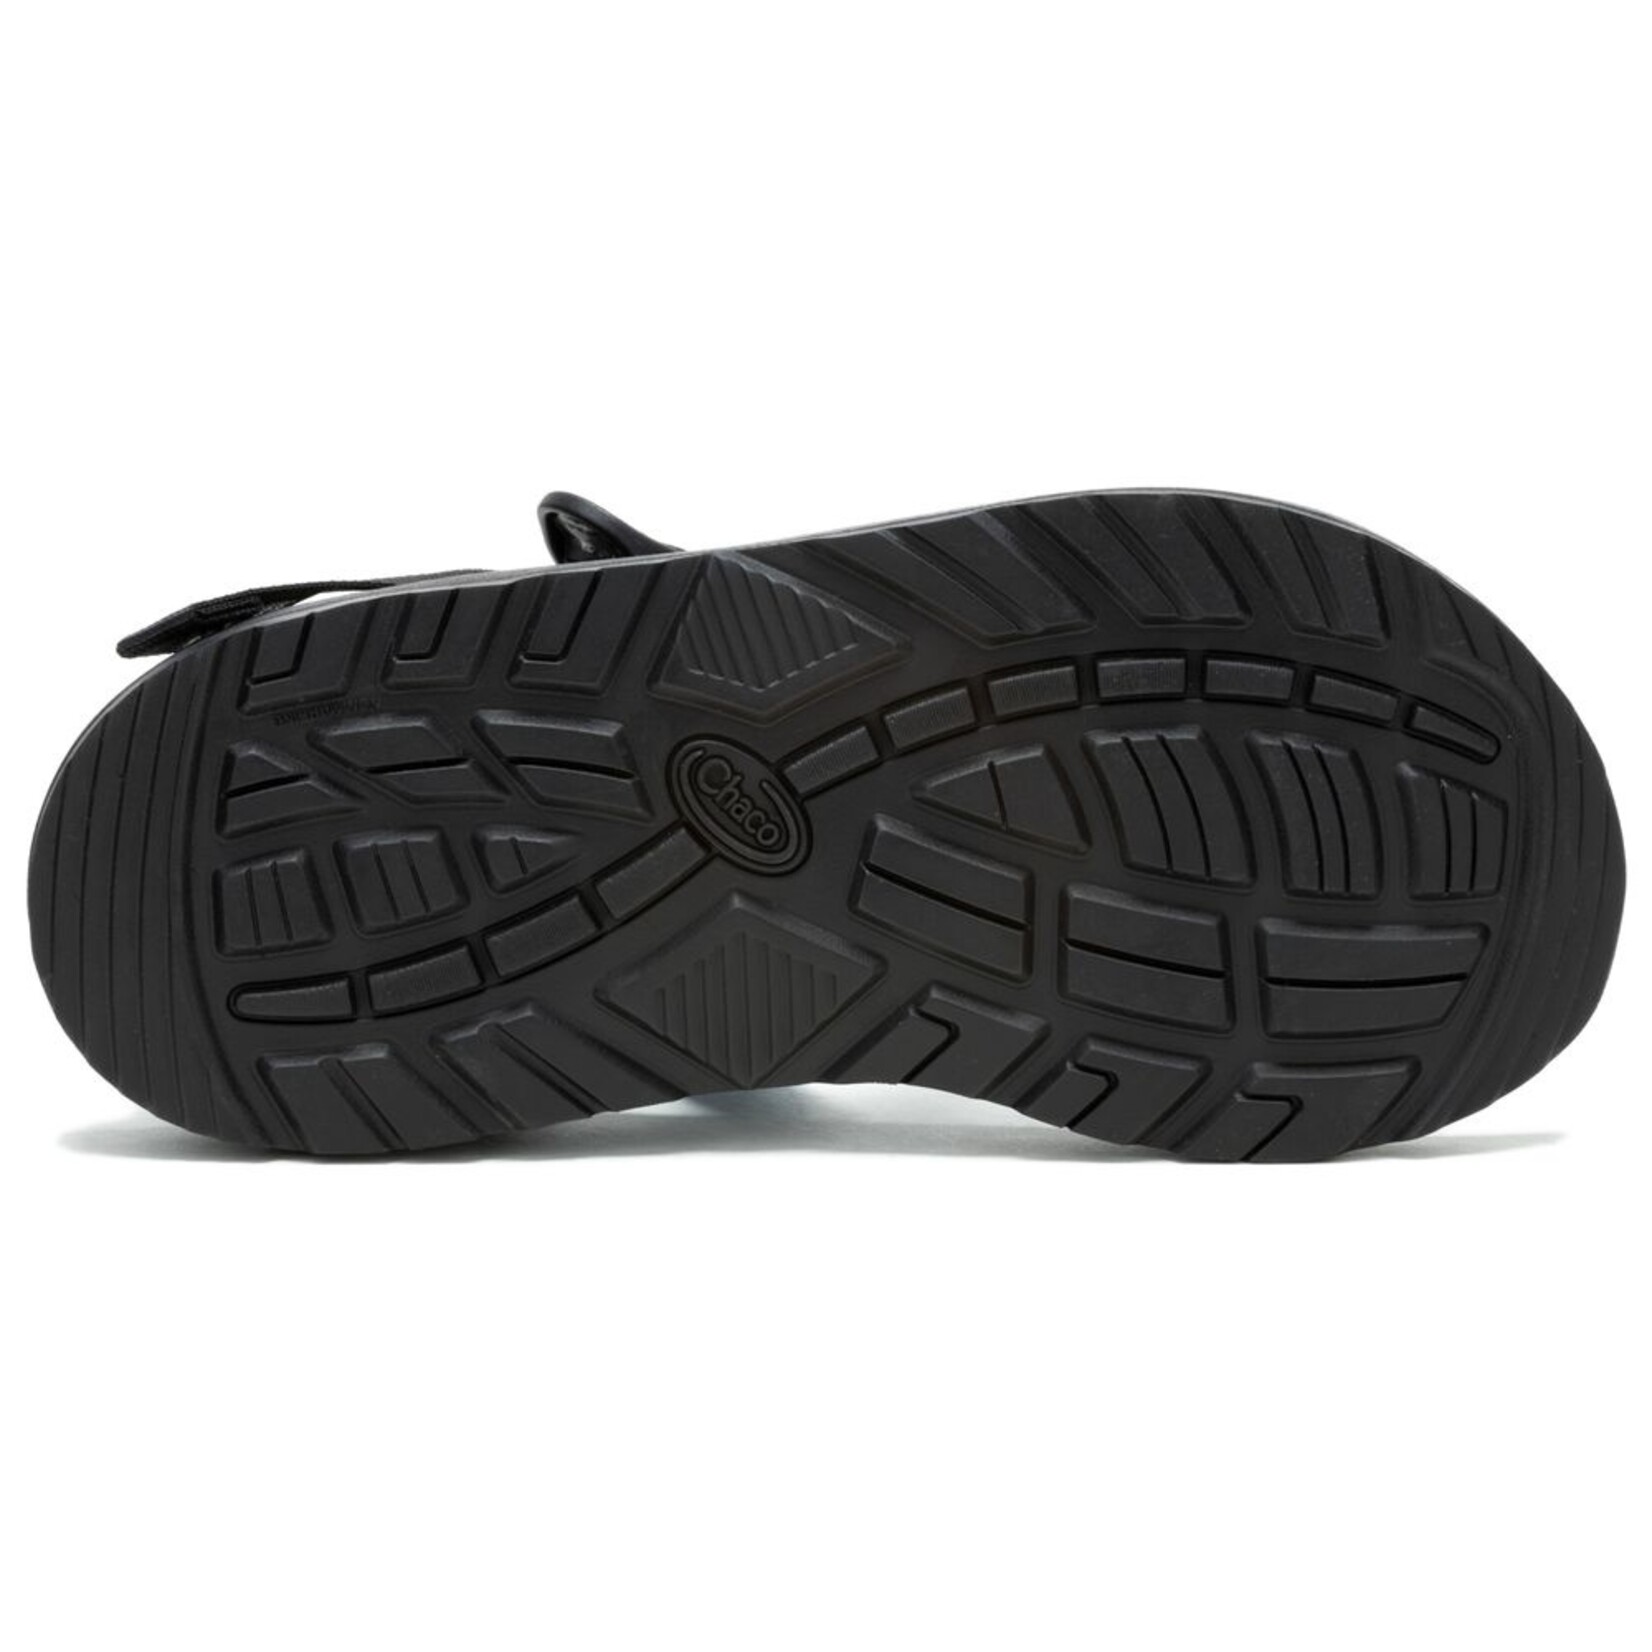 Chaco Chaco Men's Z/1 Classic with NRS Strap Webbing - Closeout